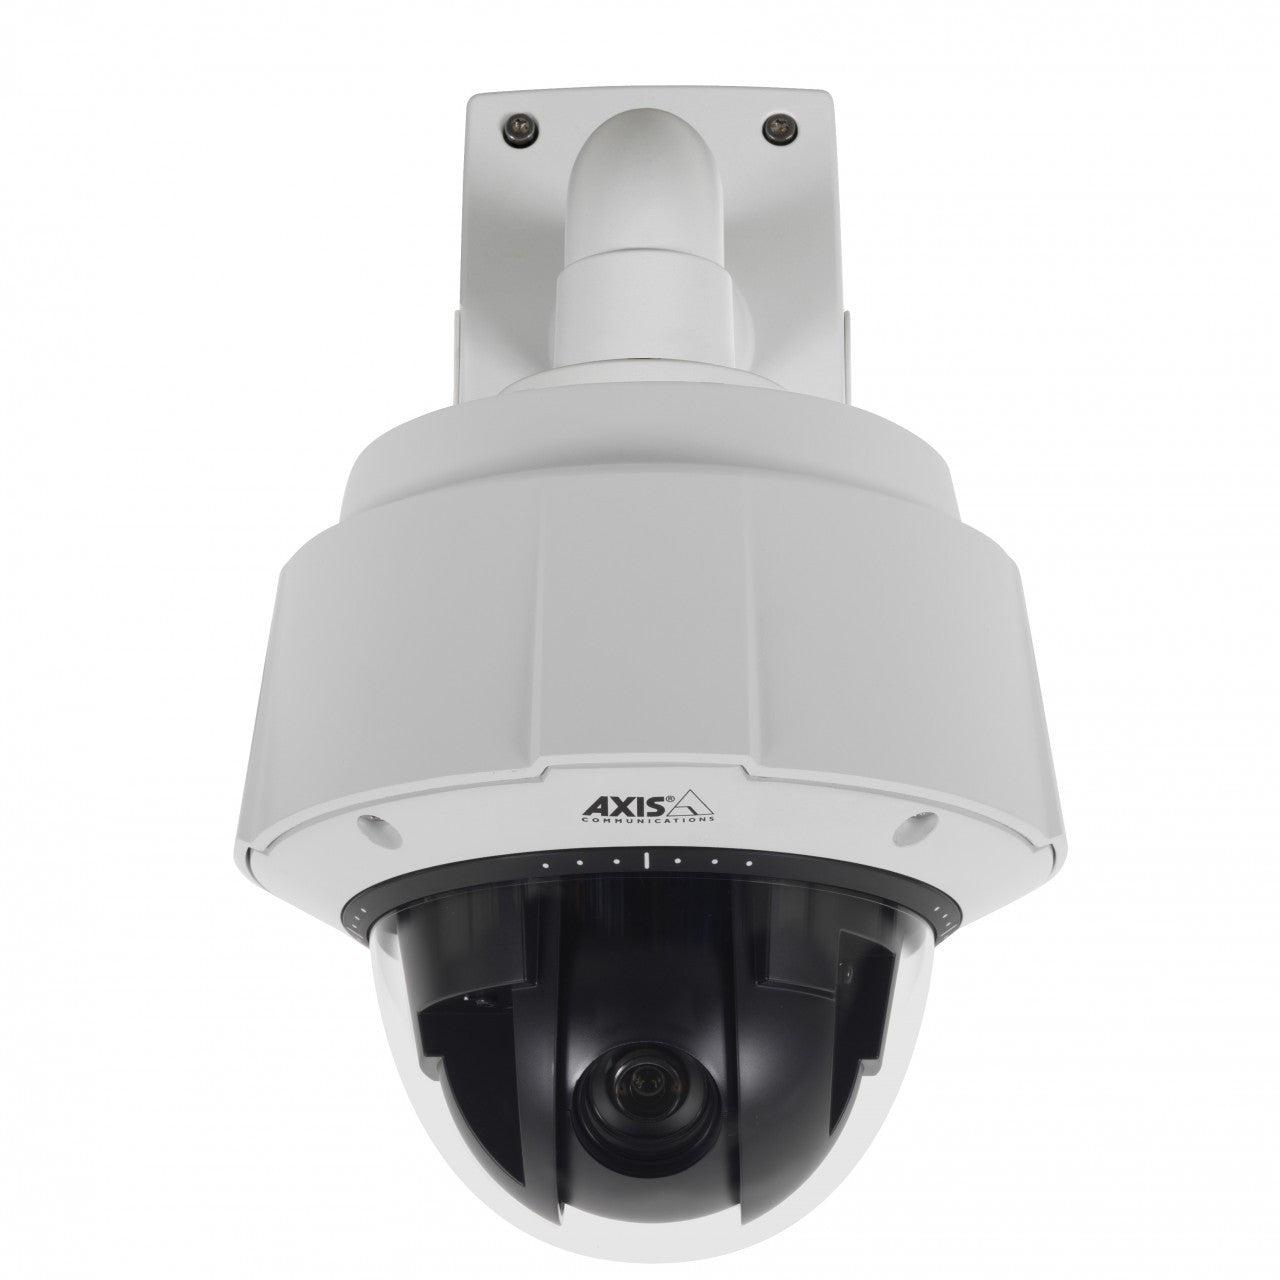 AXIS Q6032-E on a AXIS T91A61 Wall Bracket